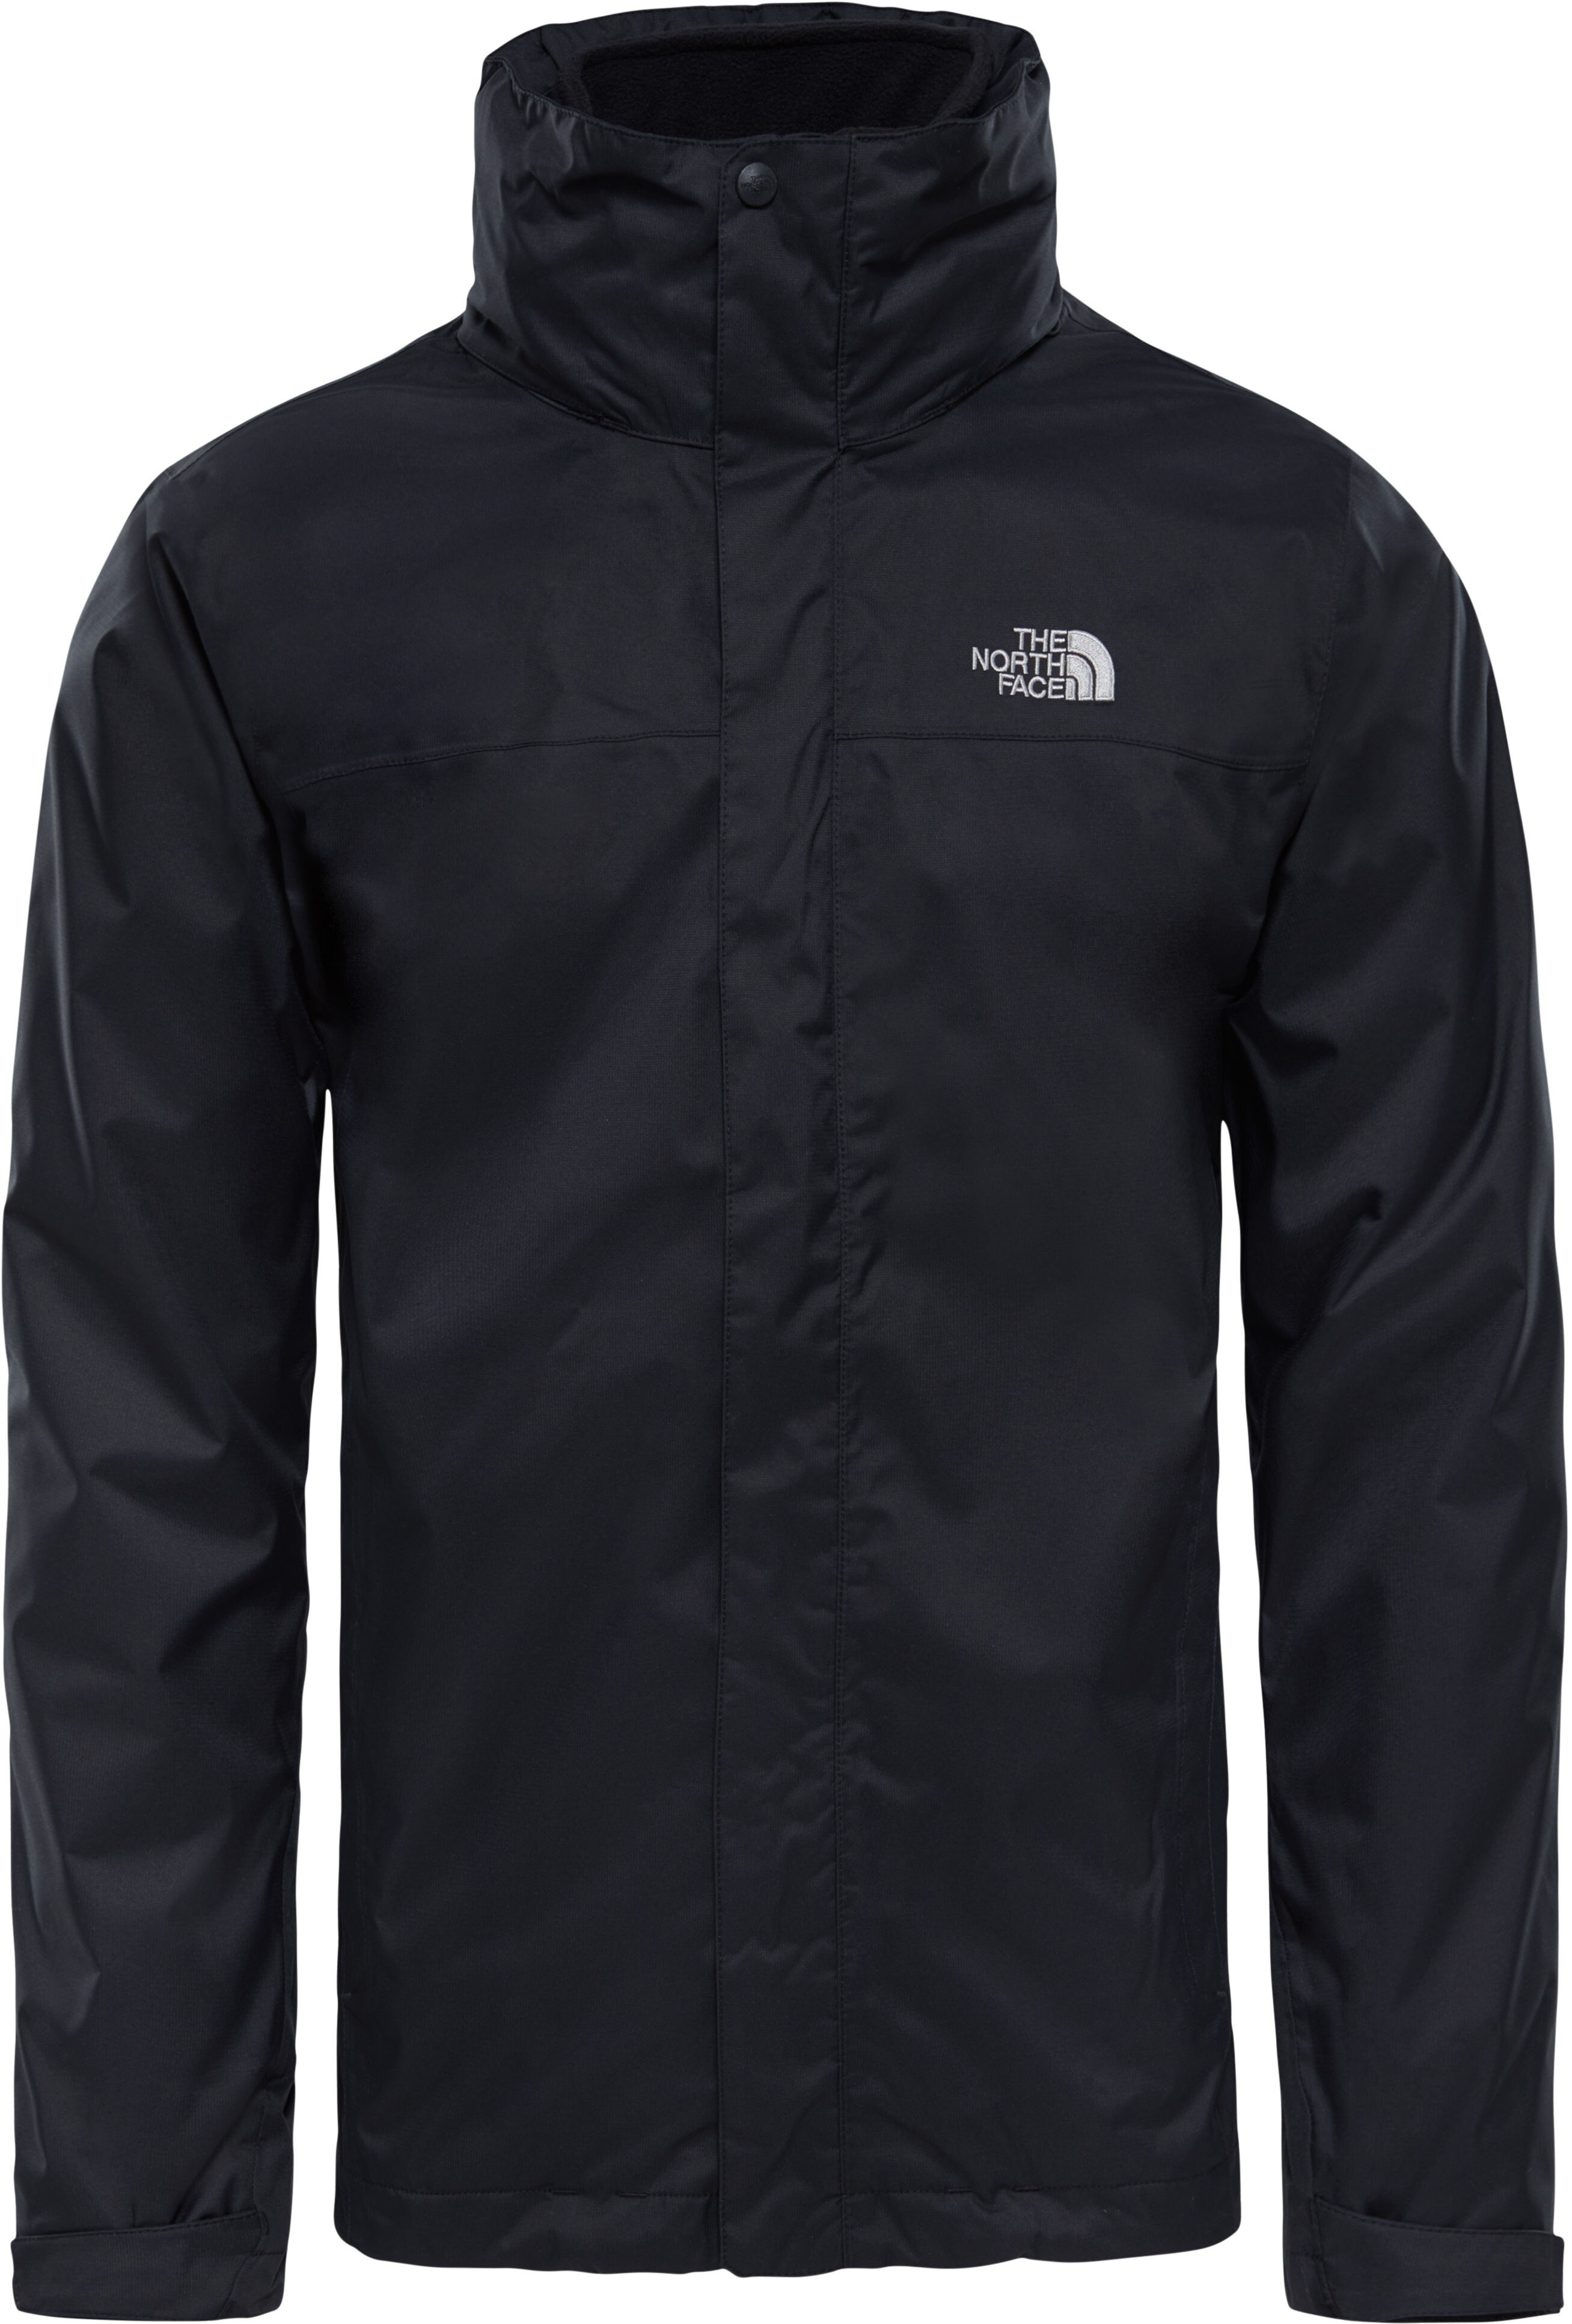 The North Face Evolve II Triclimate Jacket Men tnf black at addnature.co.uk